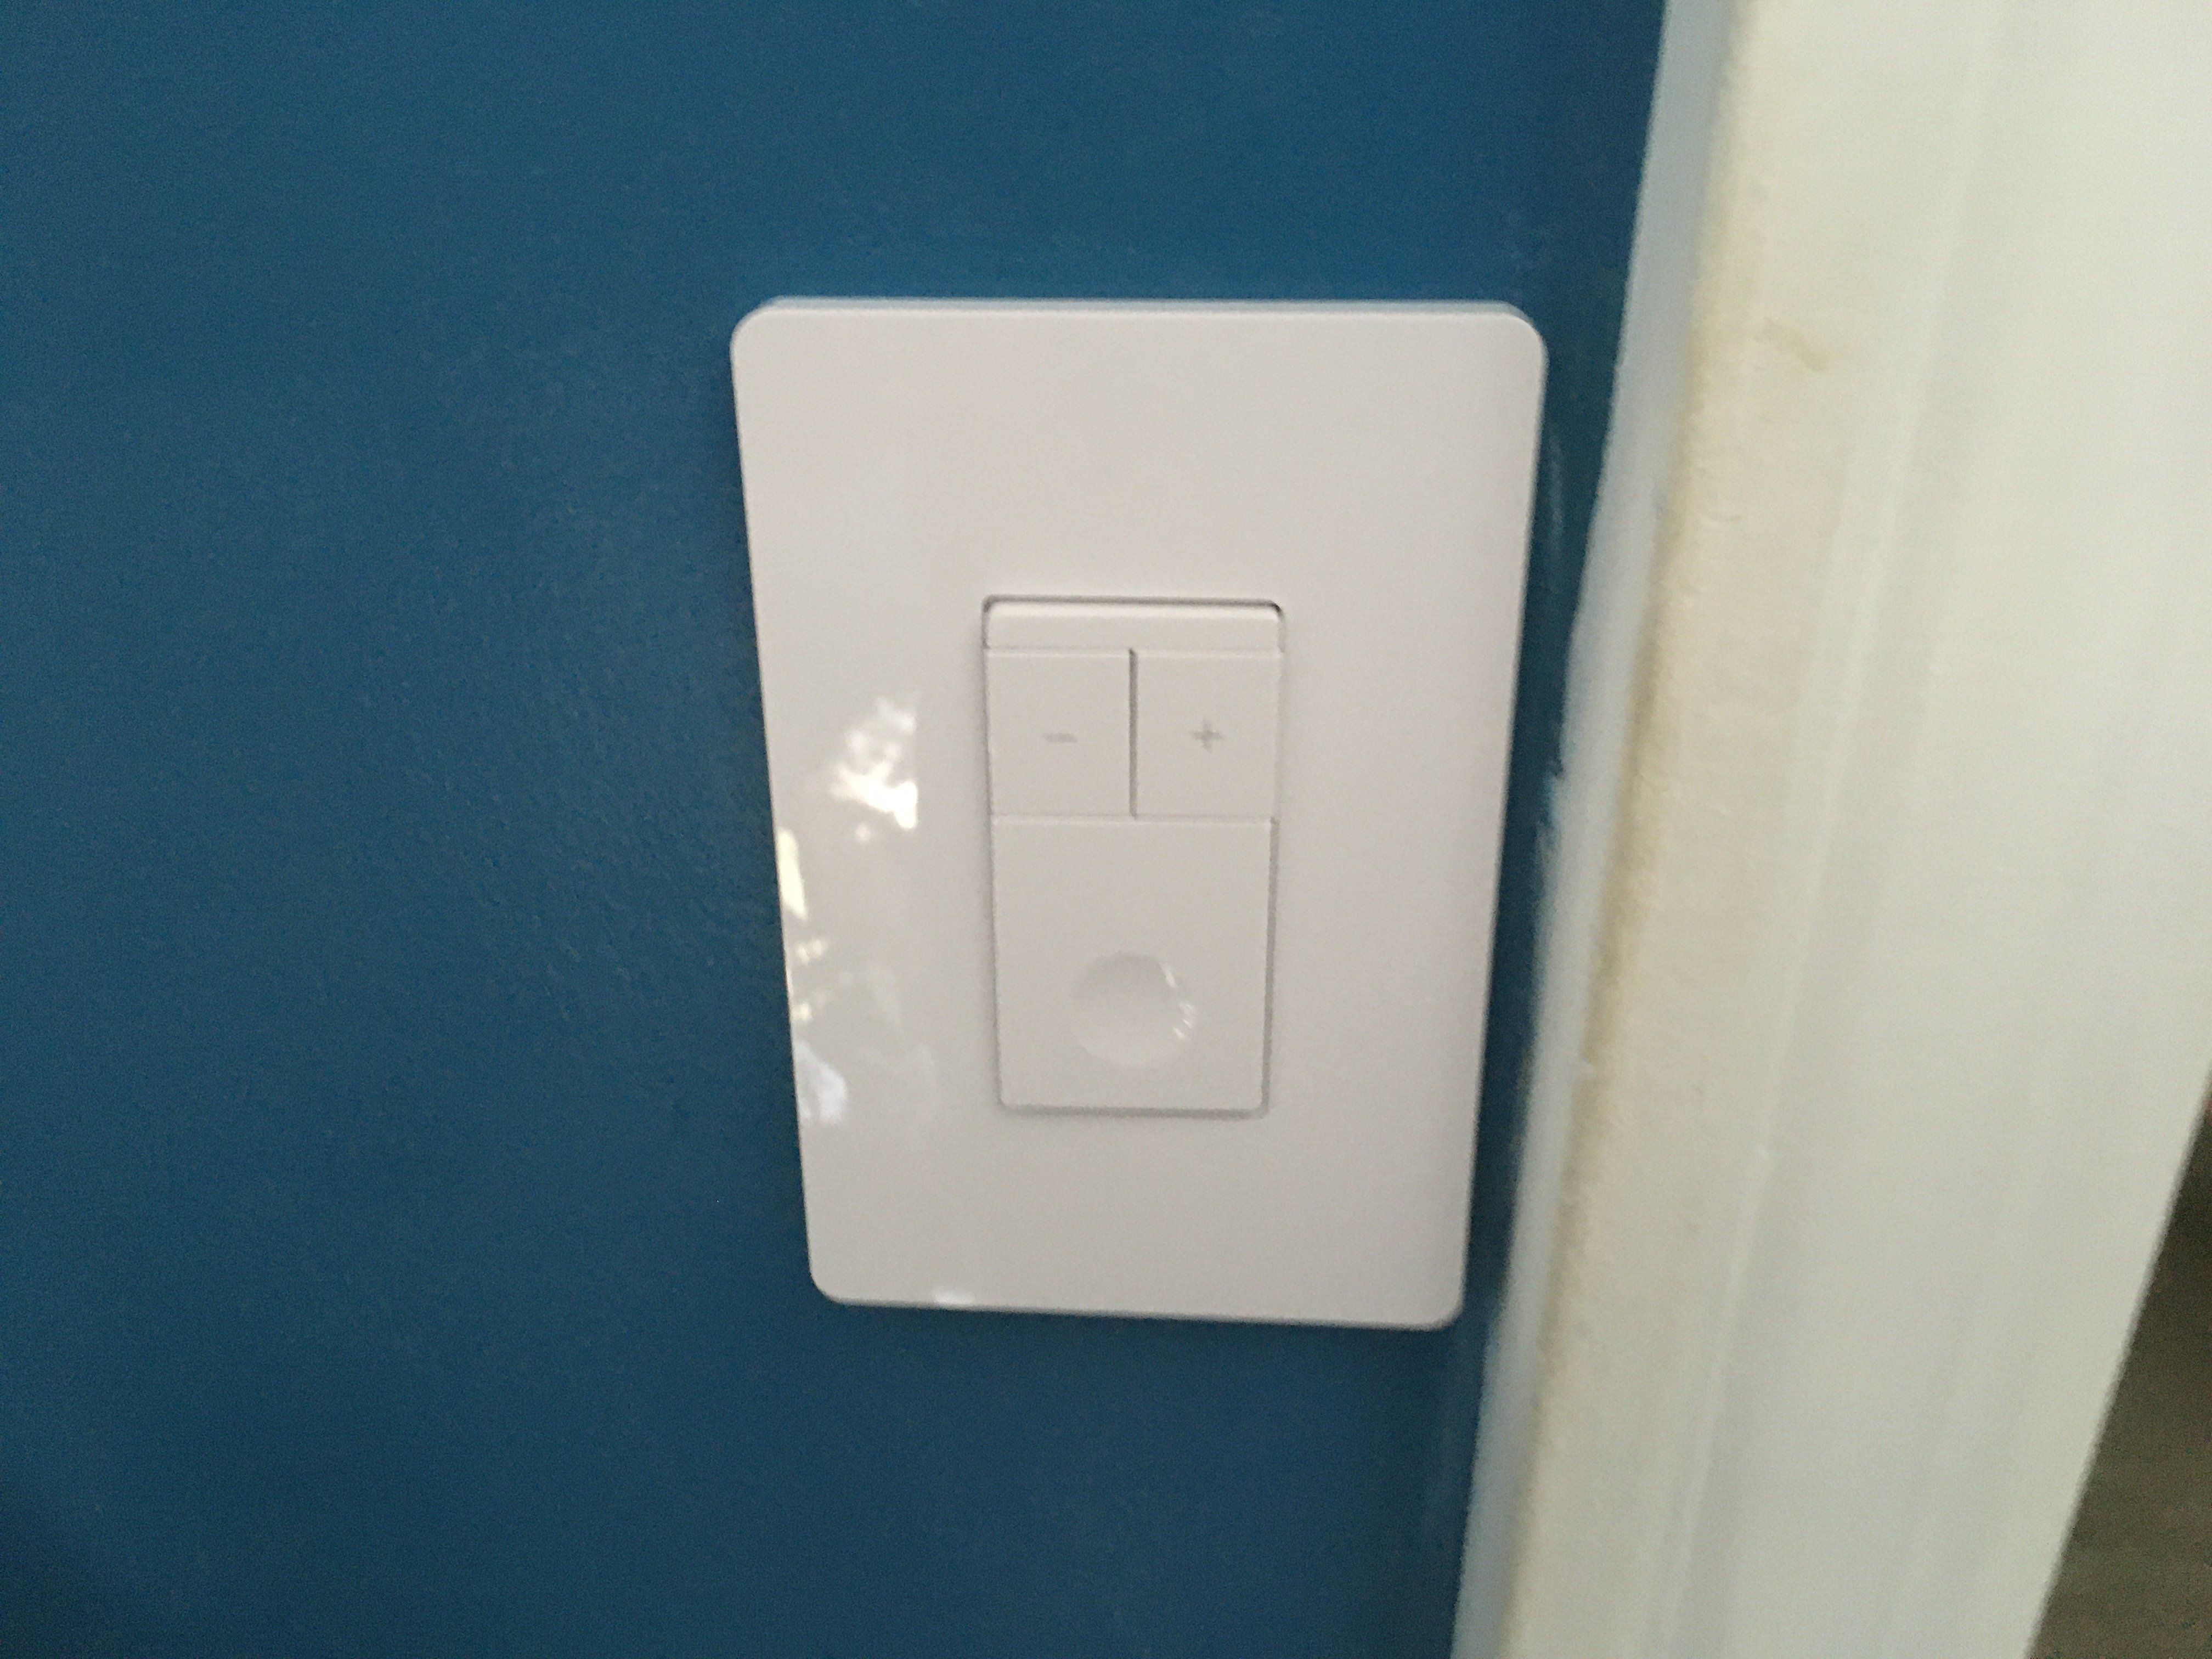 TratLife Smart Dimmer Switch on the wall